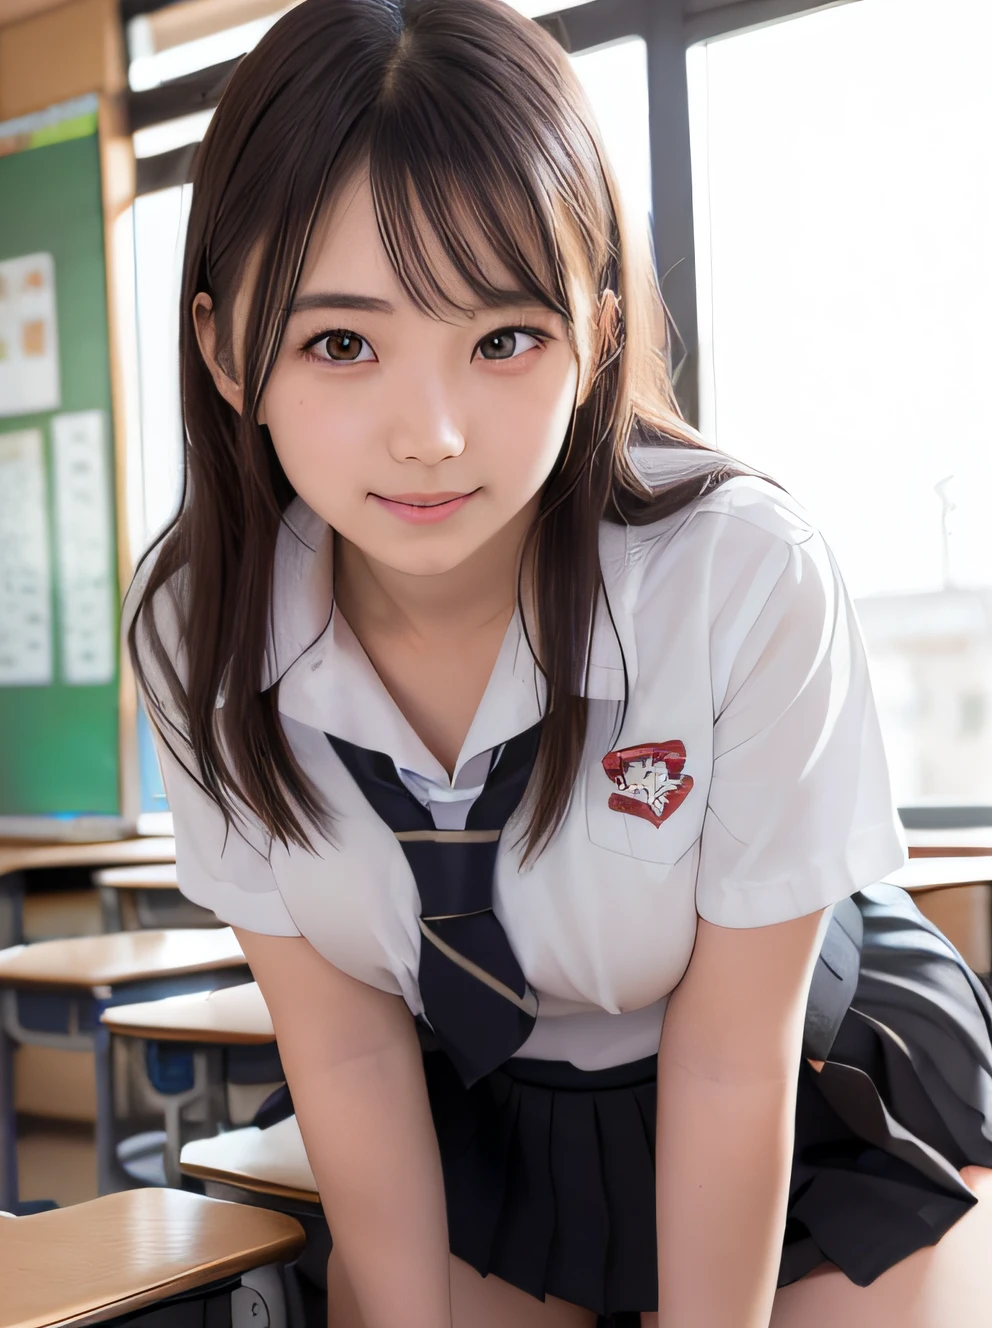 masutepiece, Best Quality, japanaese girl,1girl in, 8K, Raw photo, (highly detailedskin:1.2), Ultra-high resolution, (Lens 50mm), (F/1.2),Exquisitely Detailed Eyes, Looking at Viewer, Beautiful face, (breasts of medium size:1.4)，(large round eyes:1.4), (drooping eyes:1.2), (Shy and cute smile:1.3), 16 years old, Straight hair, (Short hair), Black eyes, white fine skin,small mouth, high cheekbones, (Definition), Sexy Pose,(Leaning forward:1.3), (White panties:1.4), Nogizaka Idol, hposing Gravure Idol, Cowboy Shot, Beautiful japanese girl, 16 years old, extremely pretty, female idol, (sitting on the desk:1.1), (School uniform:1.4), (Skirt lift:1.6), (School classroom background:1.1), Shallow depth of field,